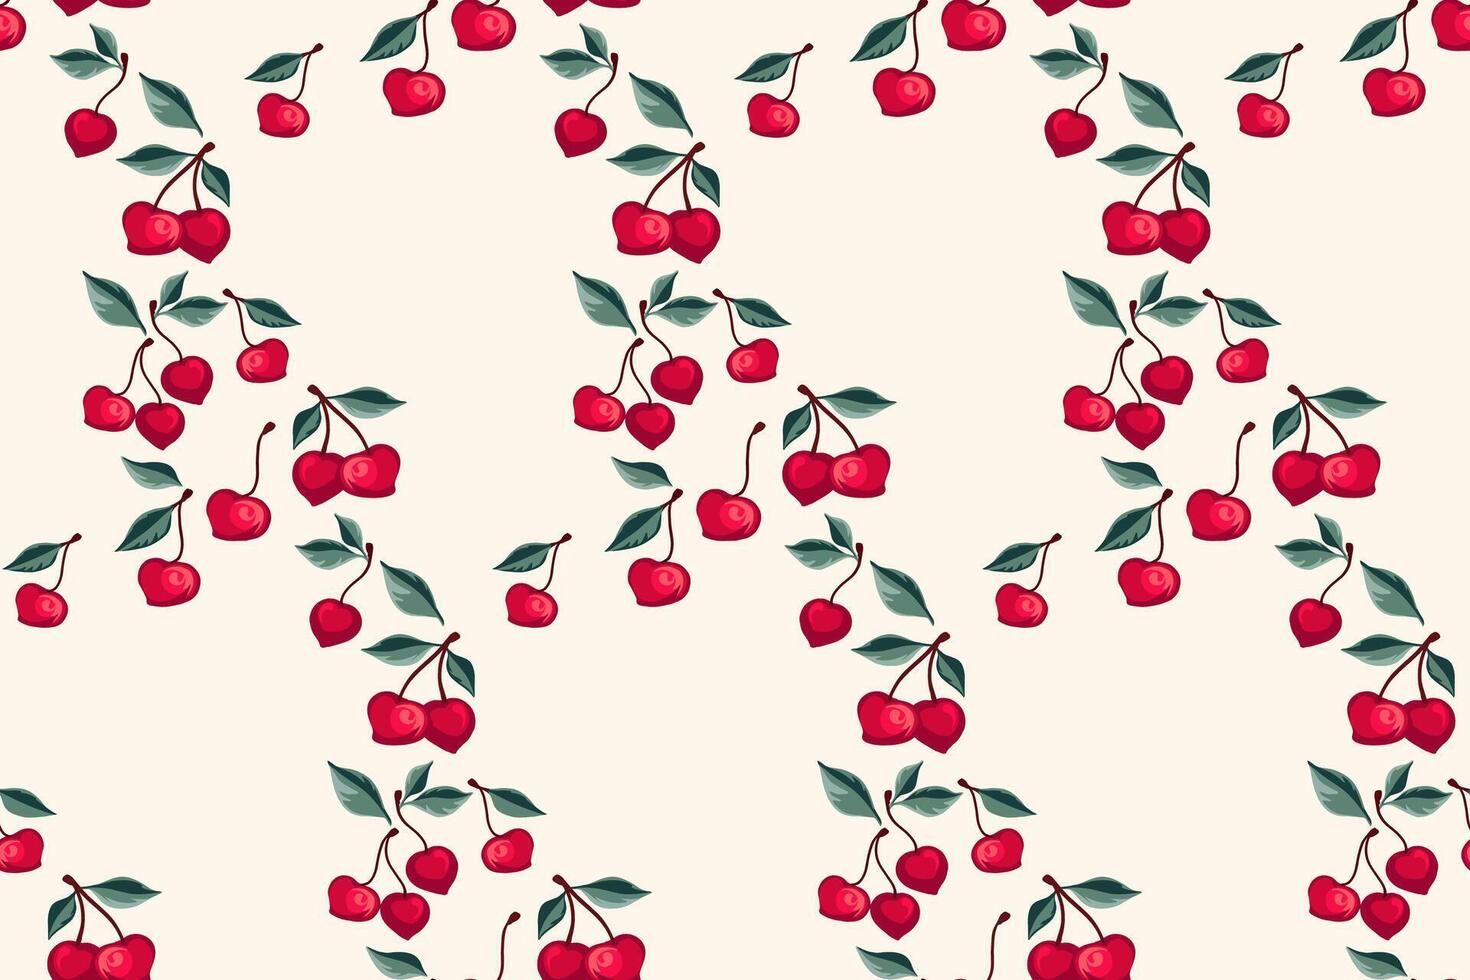 Seamless artistic stylized cherries pattern. Summer berries, fruits, leaves, background. Vector hand drawn abstract, simple cherry. Design ornament for fabric, interior decor, textile, wallpaper